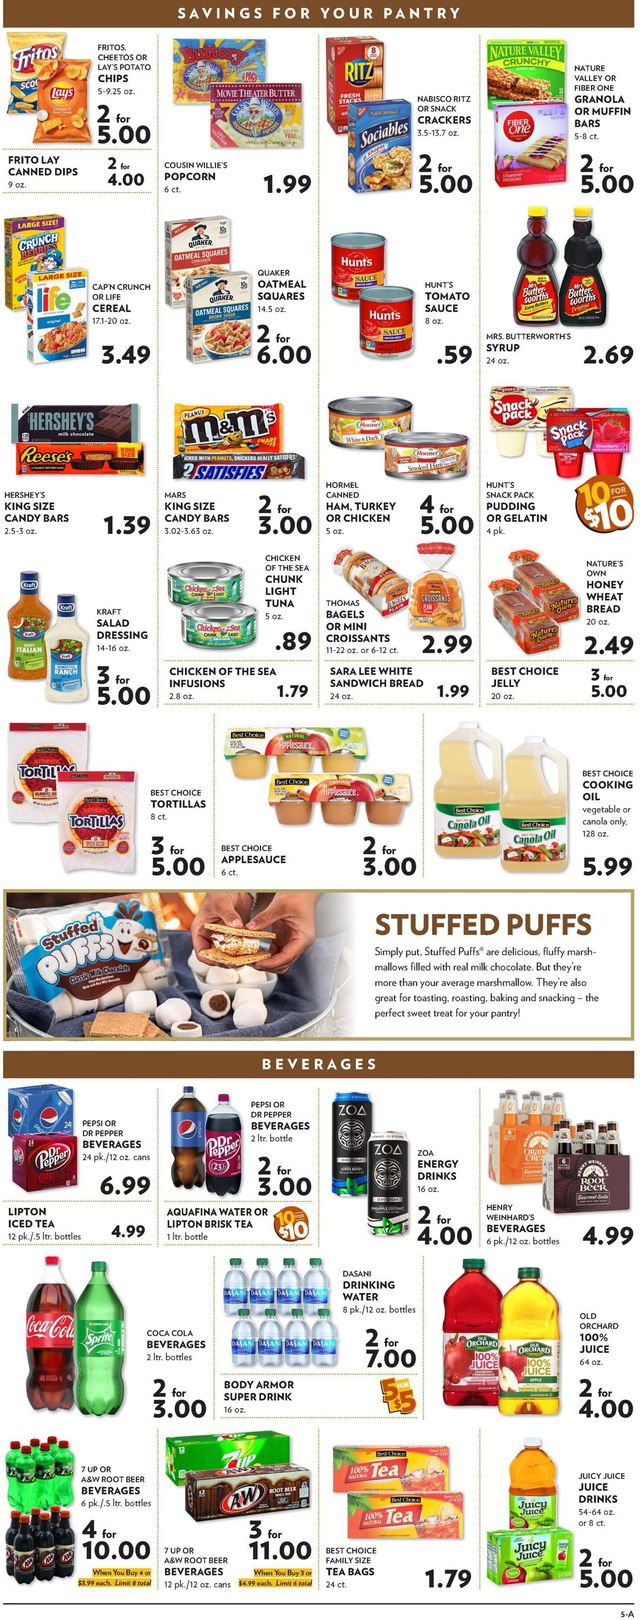 Reasor's Ad from 07/28/2021